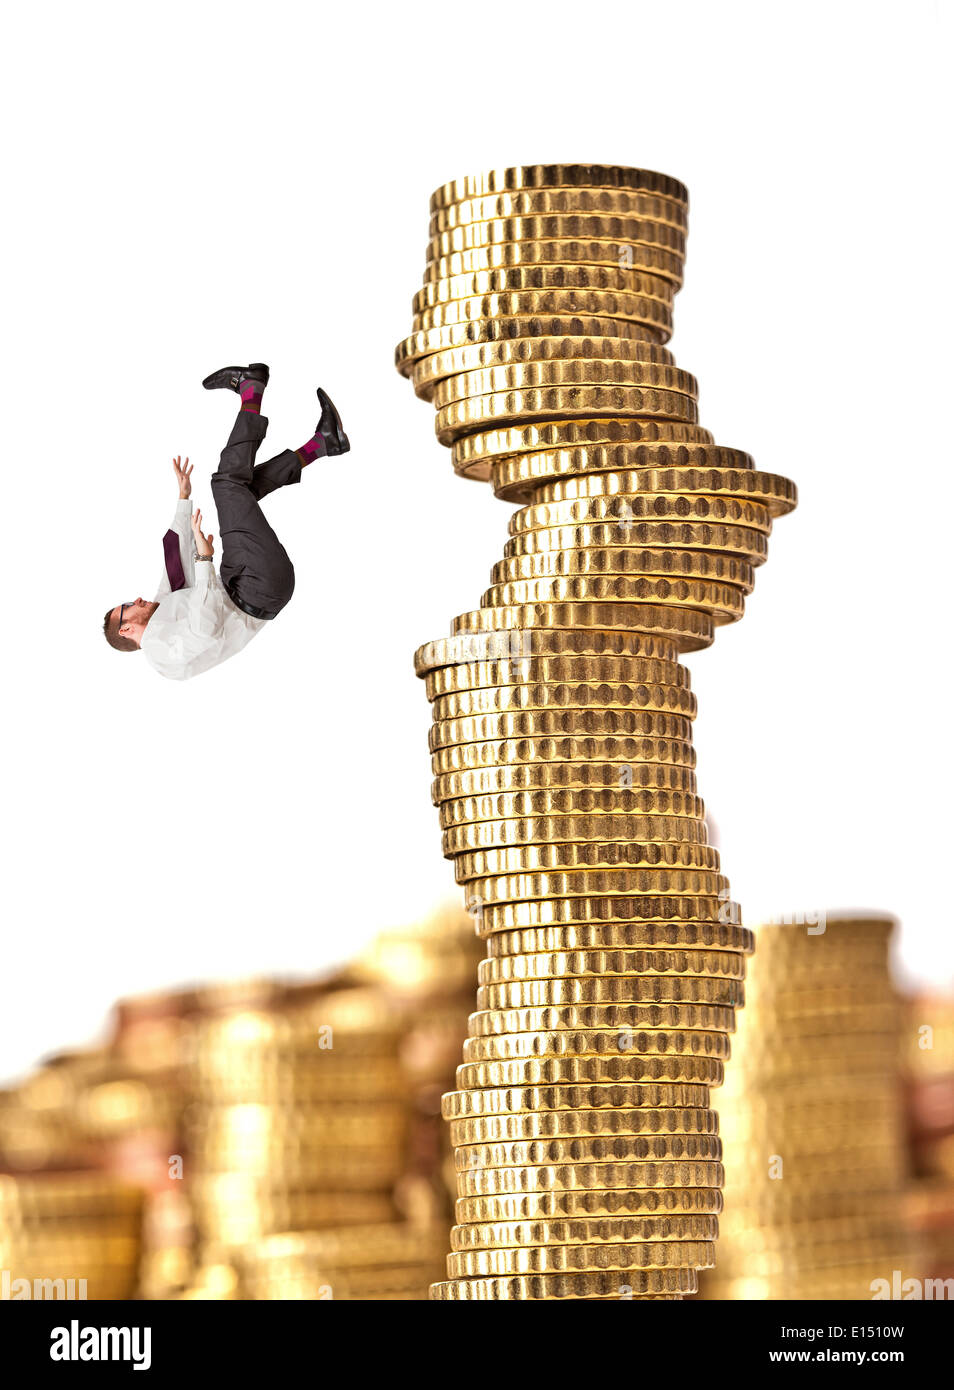 man fall from pile of euro coin Stock Photo